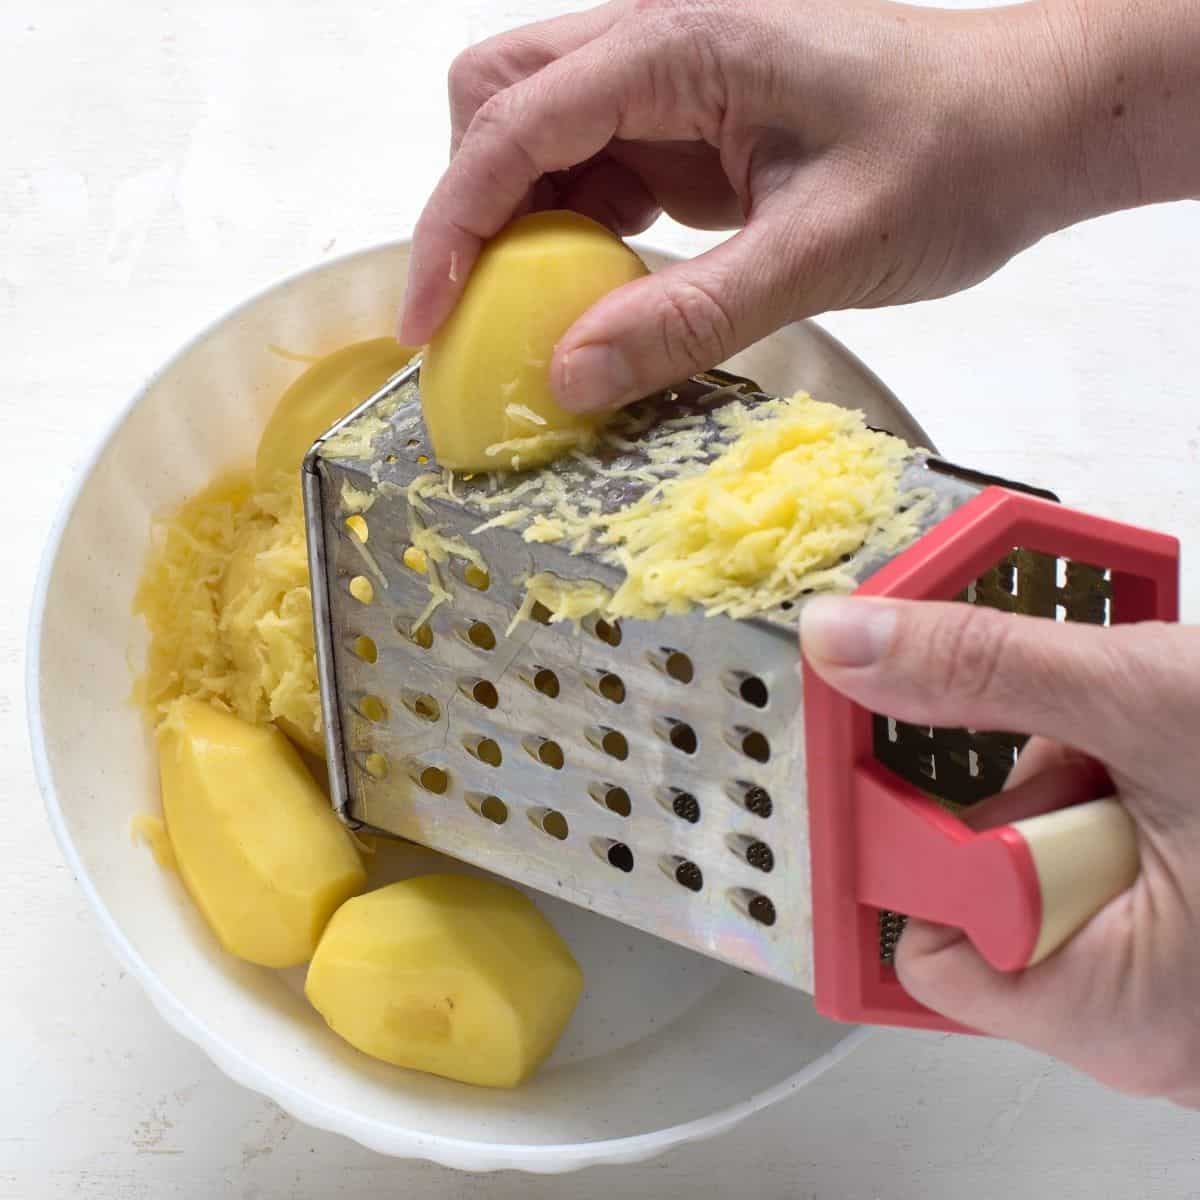 Shredding potato by hand on a hand grater box.